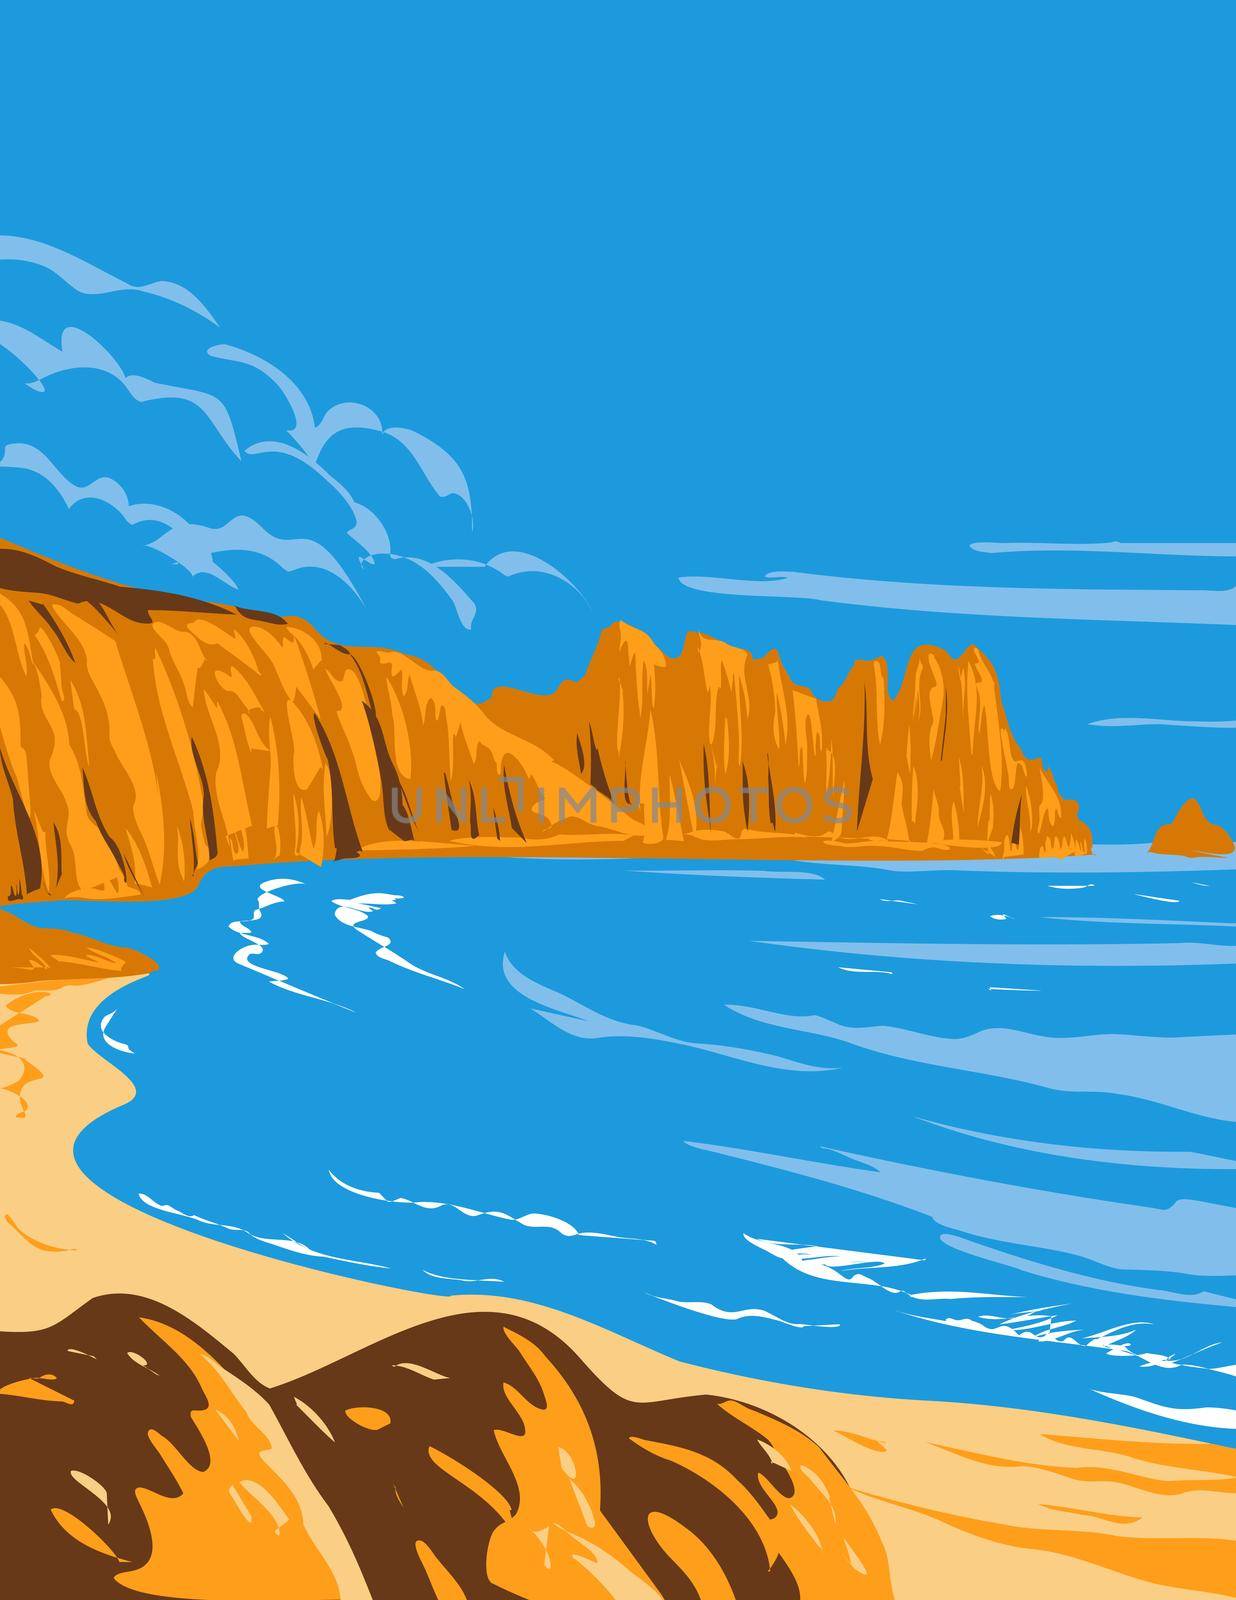 Art Deco or WPA poster of Logan Rock on Treen Cliff in Cornwall, England, UK done in works project administration style.
